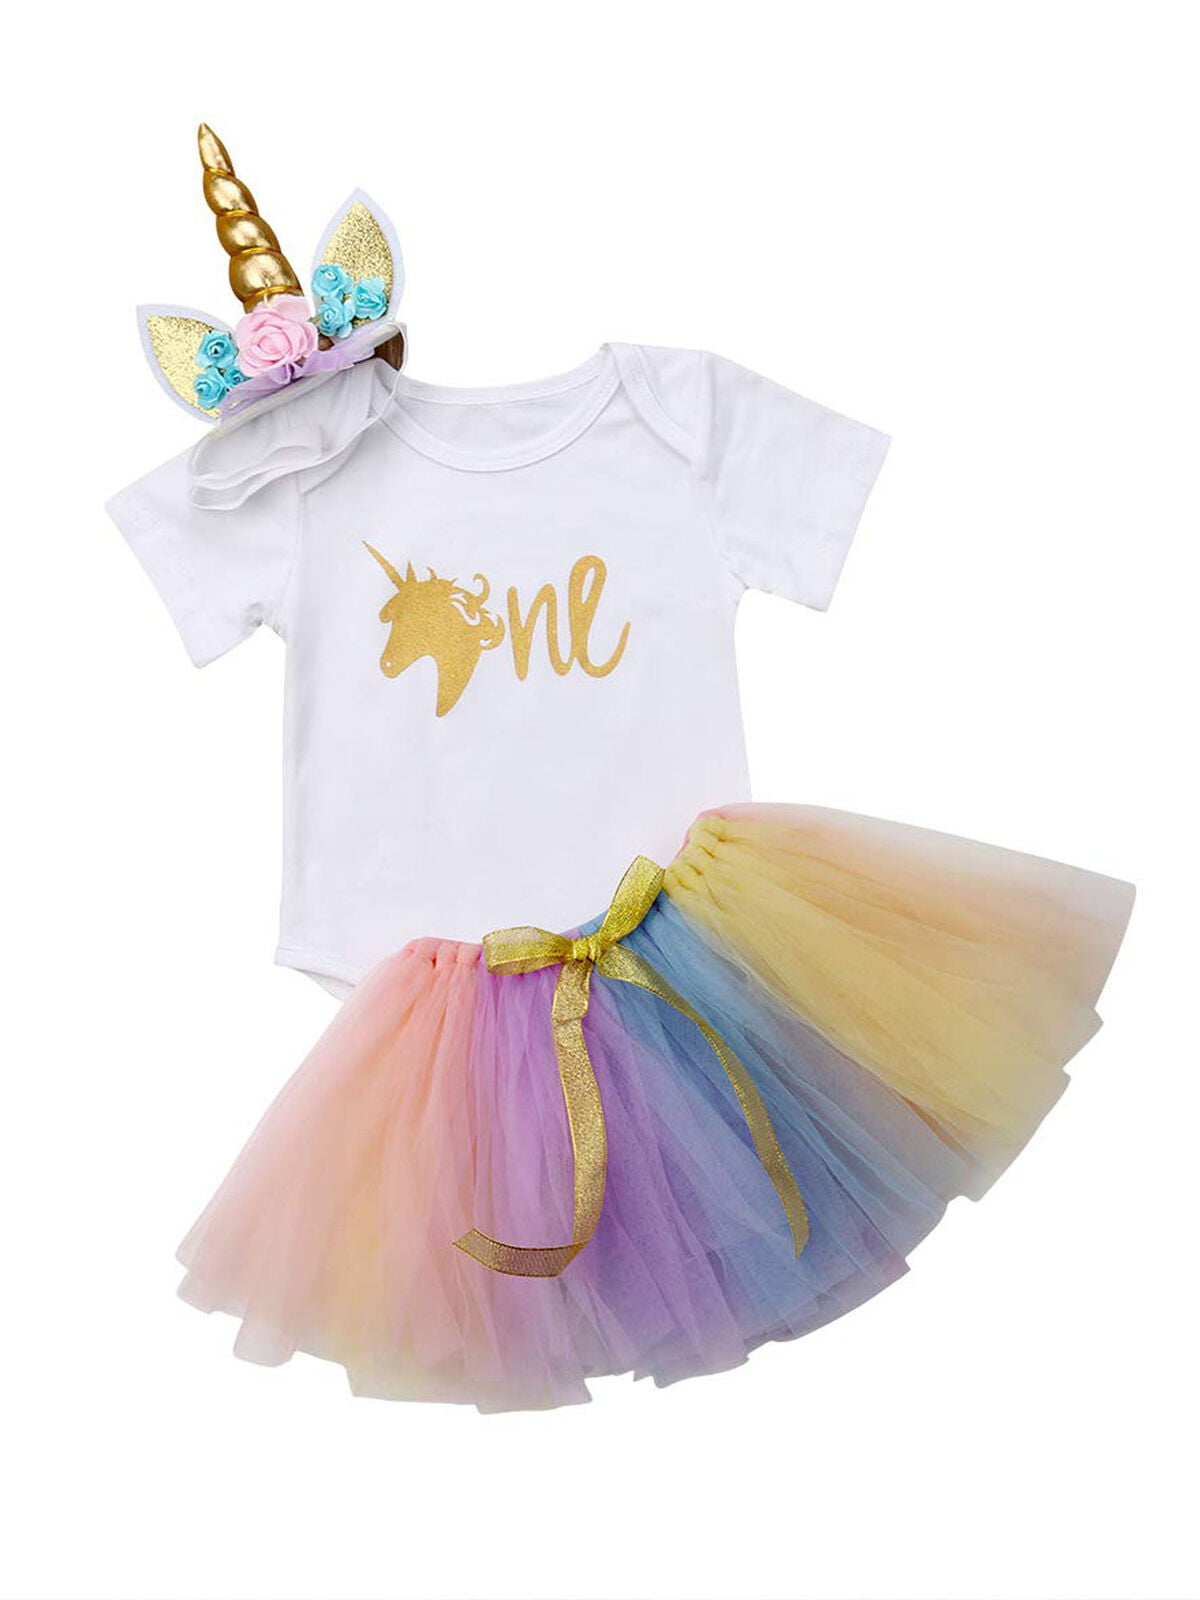 AmzBarley Baby Girls Unicorn Romper Tulle Tutu Skirt My 1st 2nd Birthday Short Sleeves Rompers Tops Kids Outfit Clothing Sets for Infants Toddlers 